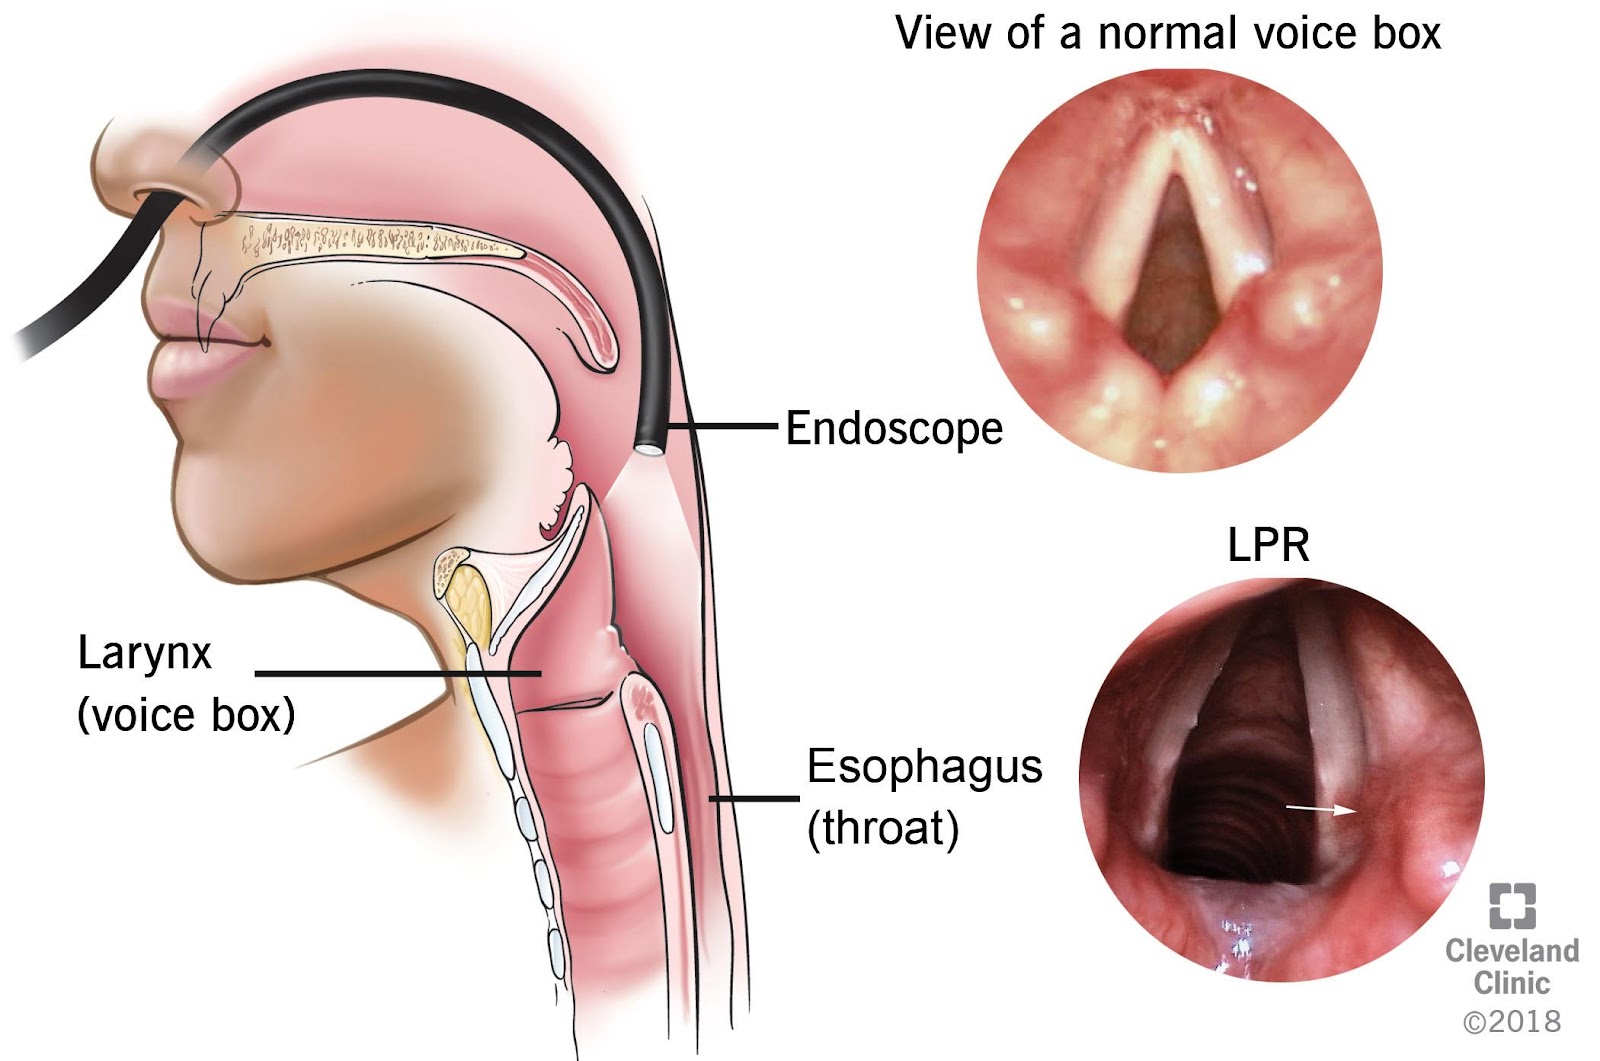 View of normal voice box | Cleveland Clinic